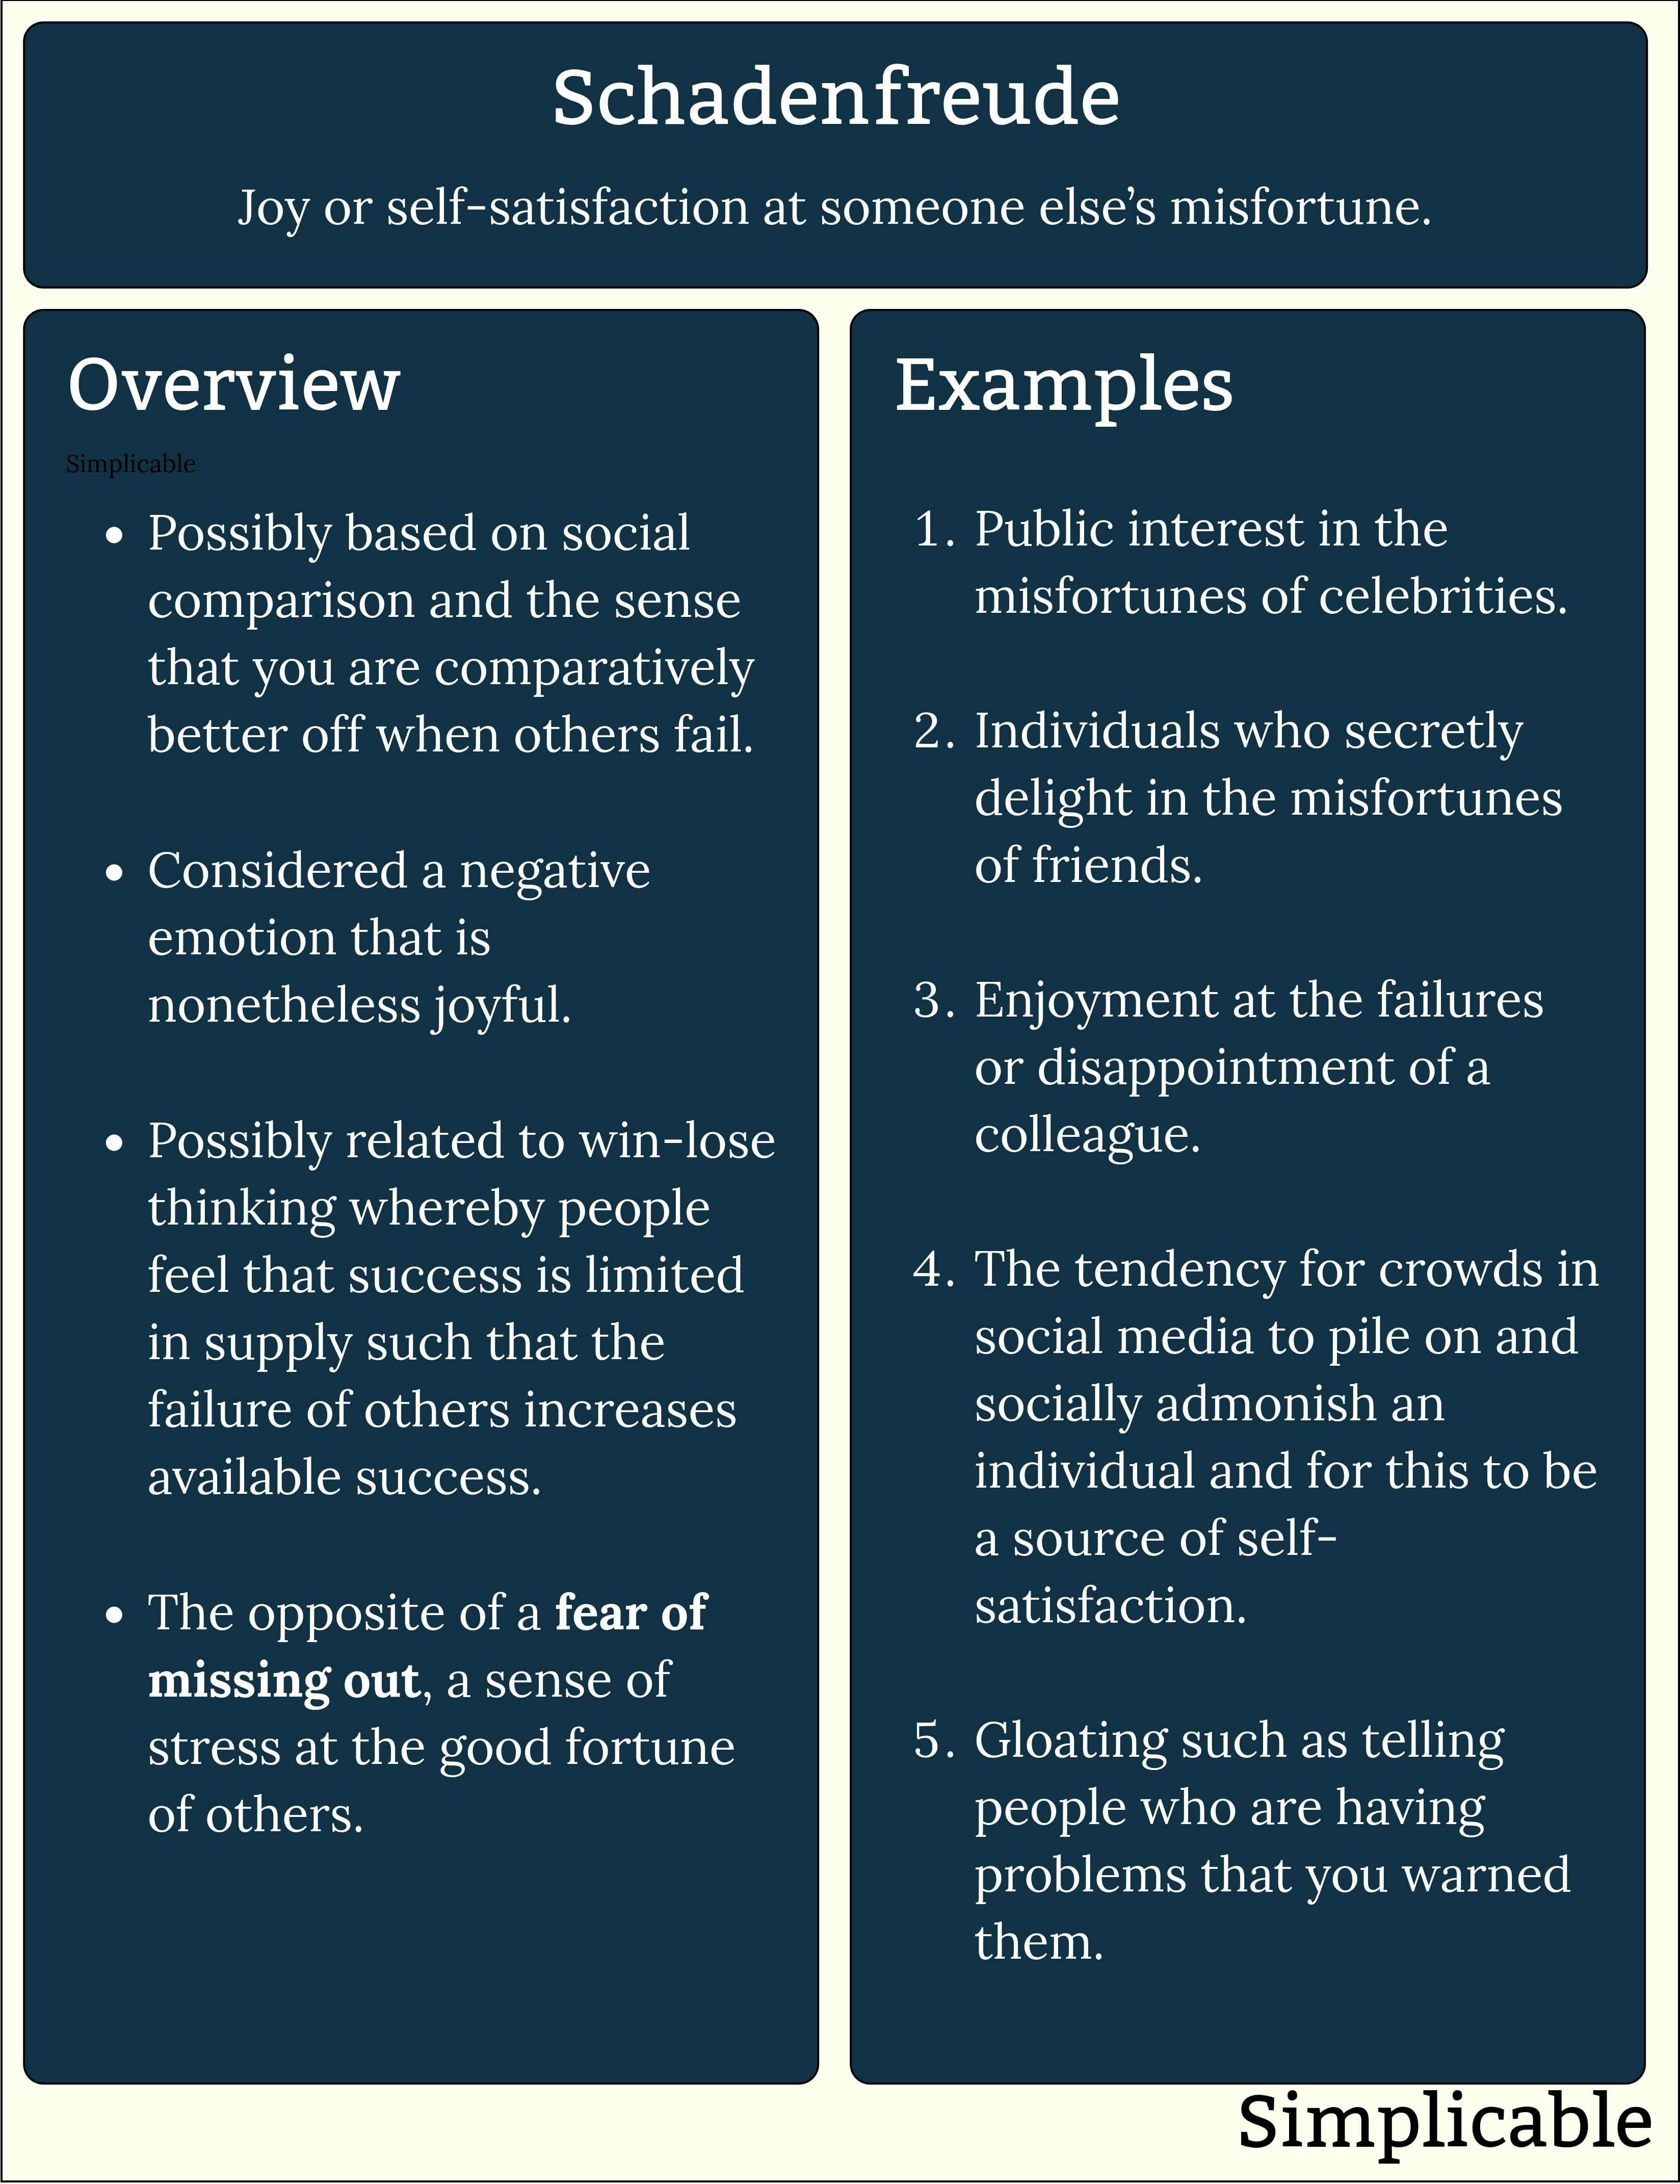 schedenfreude definition and examples